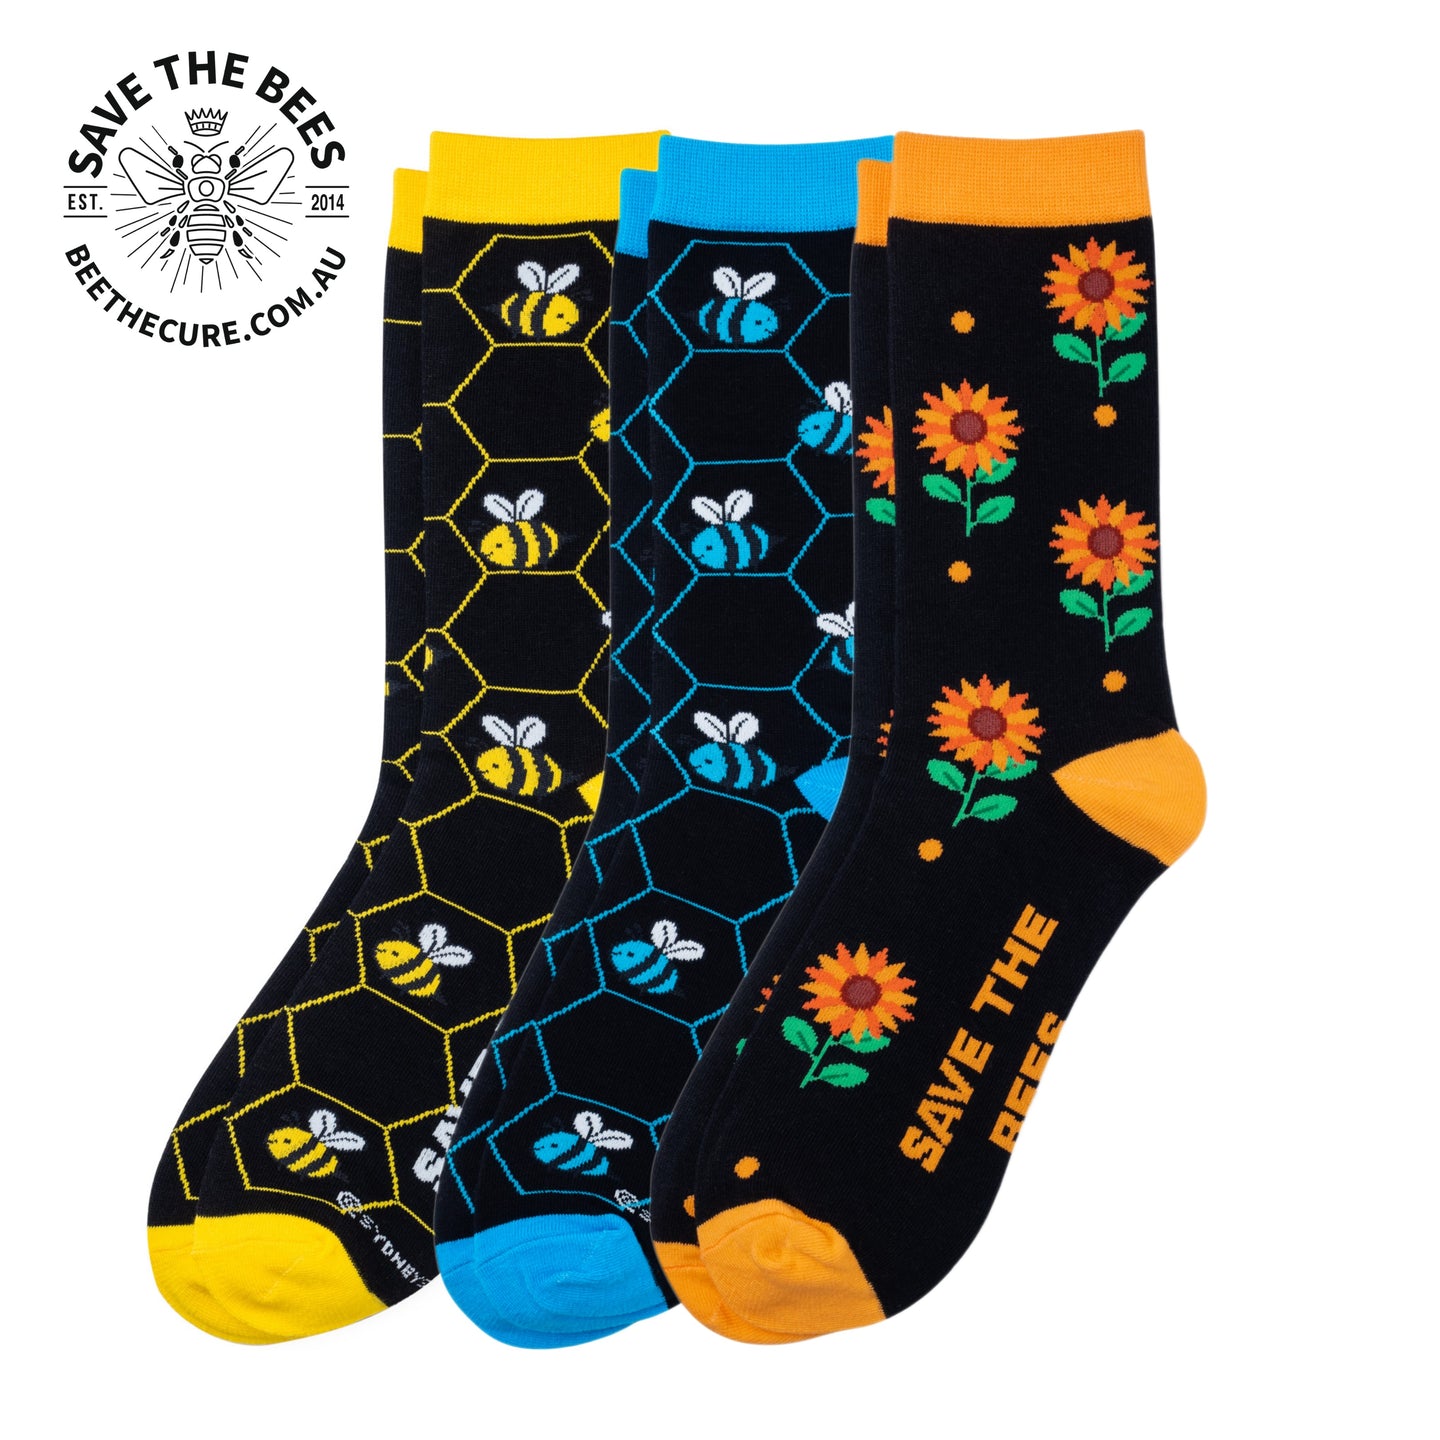 Save The Bees Sock 3-Pack Sydney Sock Project